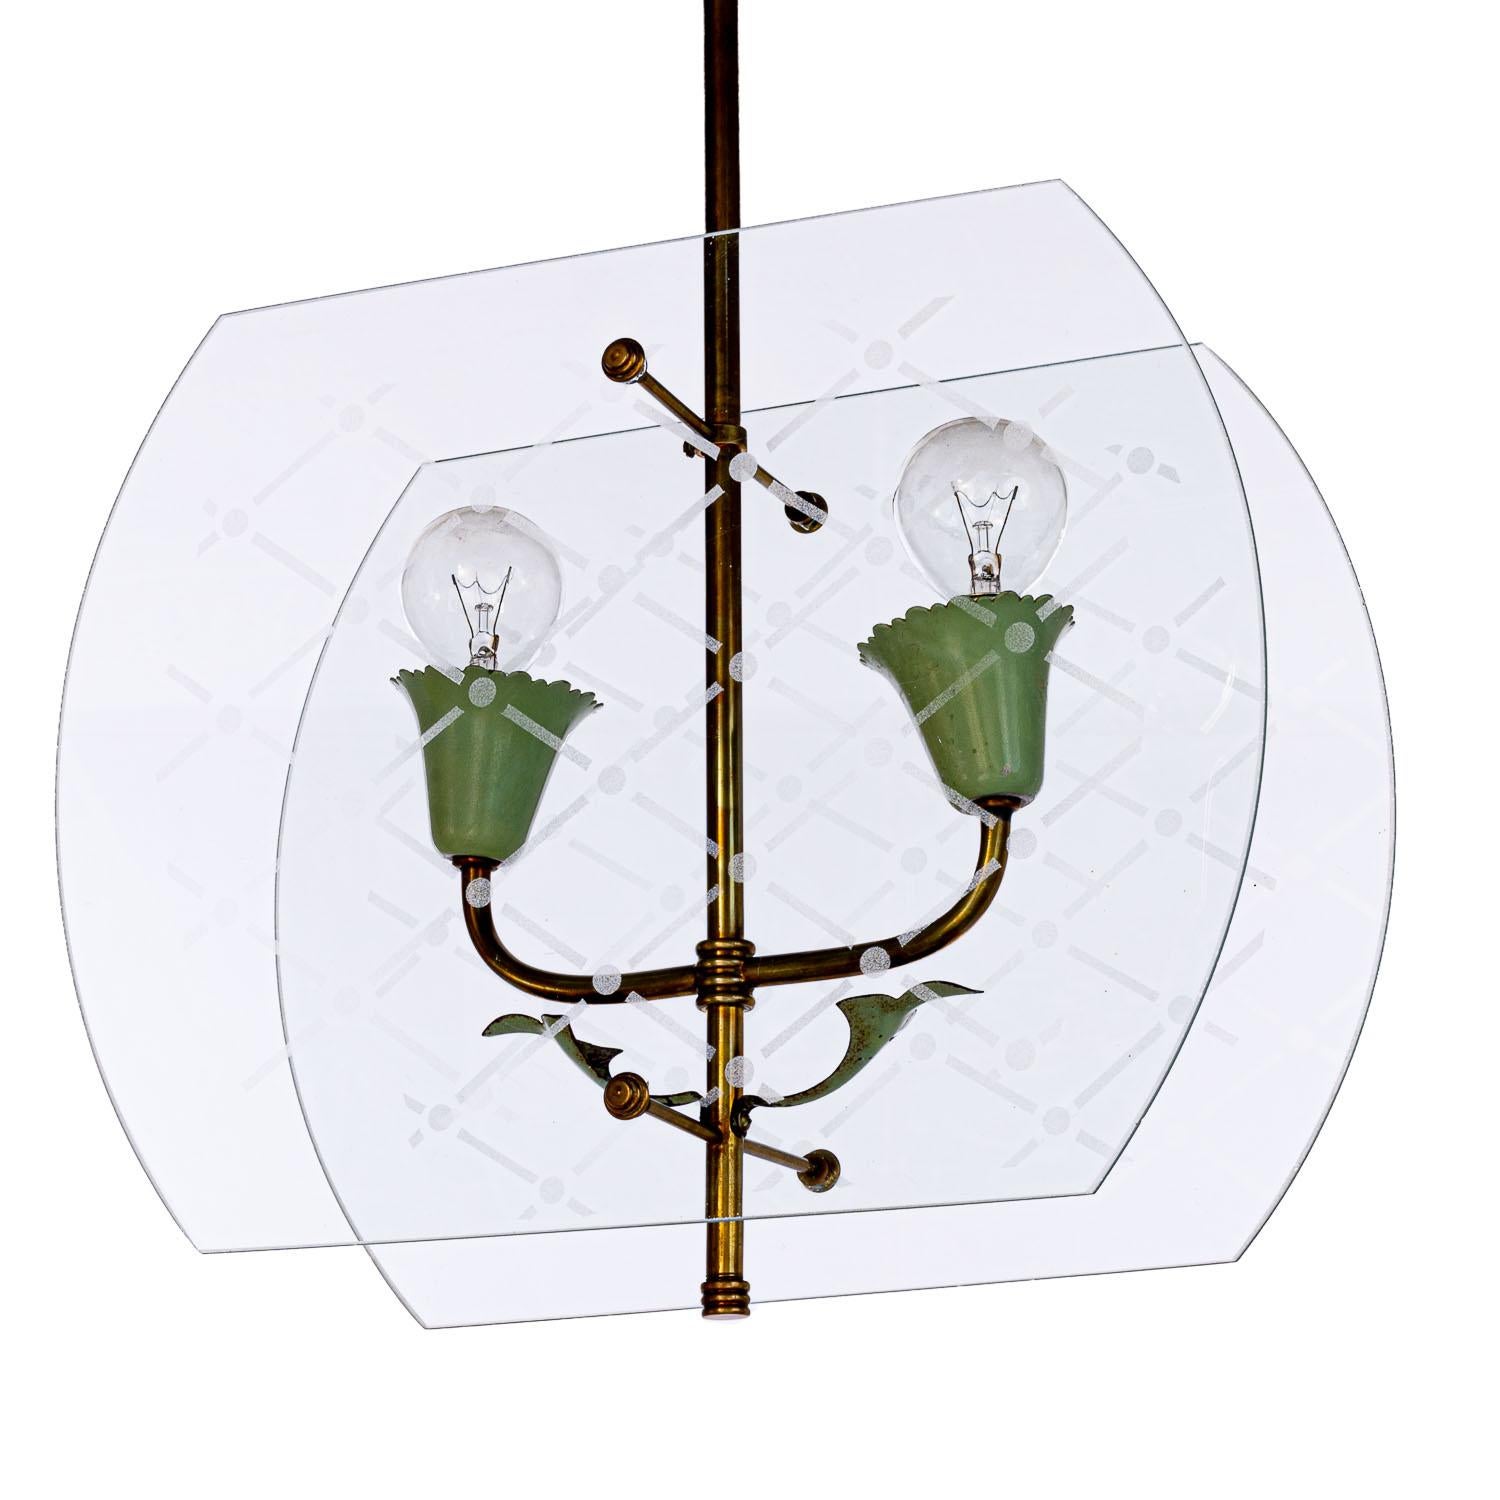 Sleek two light lantern in style of Fontana Arte. Consists of two etched glass panels with a line & ball pattern, a brass frame and green colored lamp E14 socket.